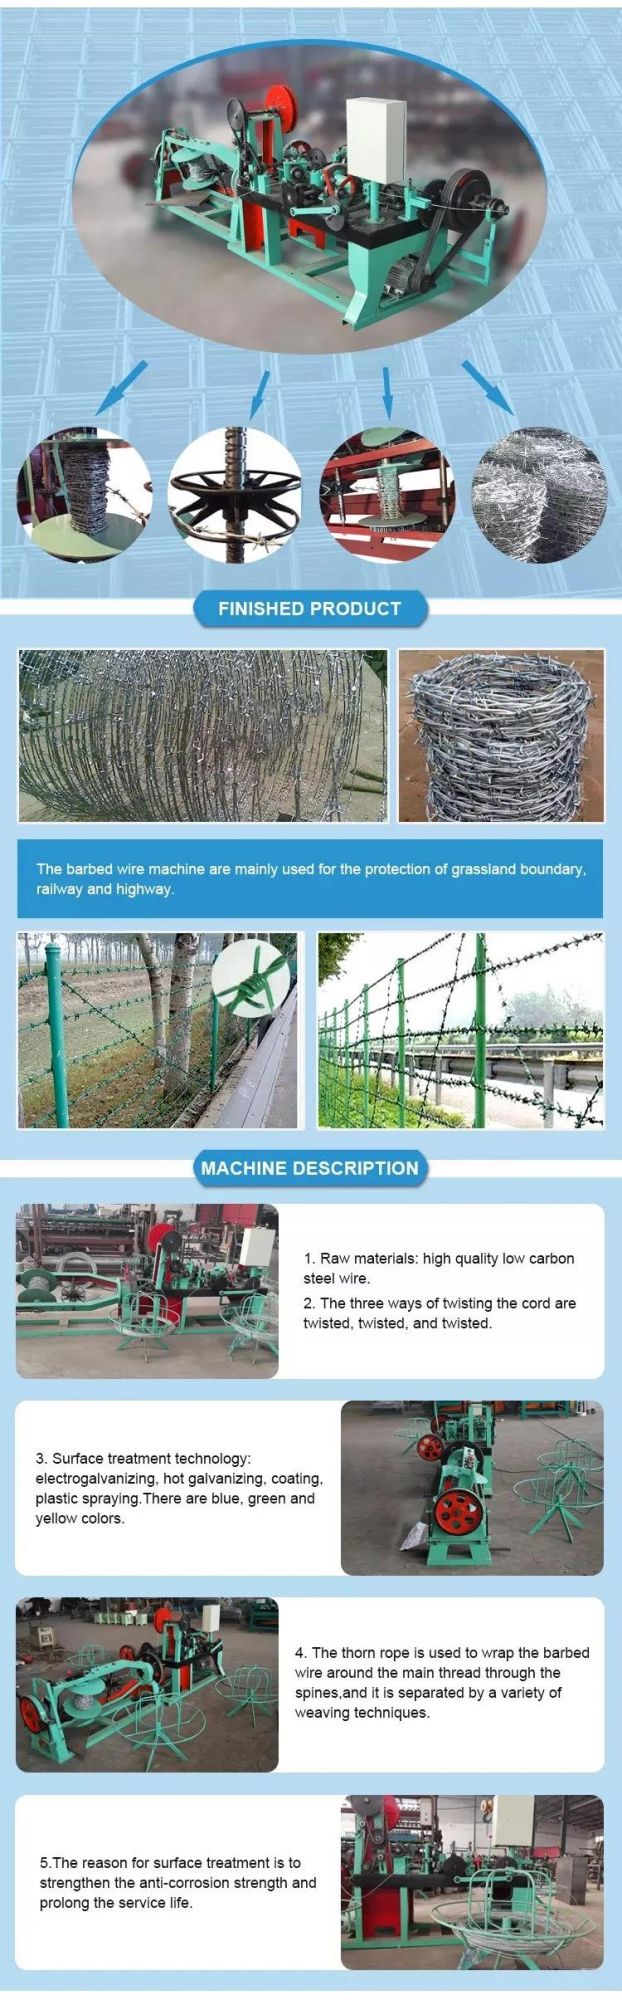 Selectedd Machinery Fully Automatic Barbed Wire Making Machine